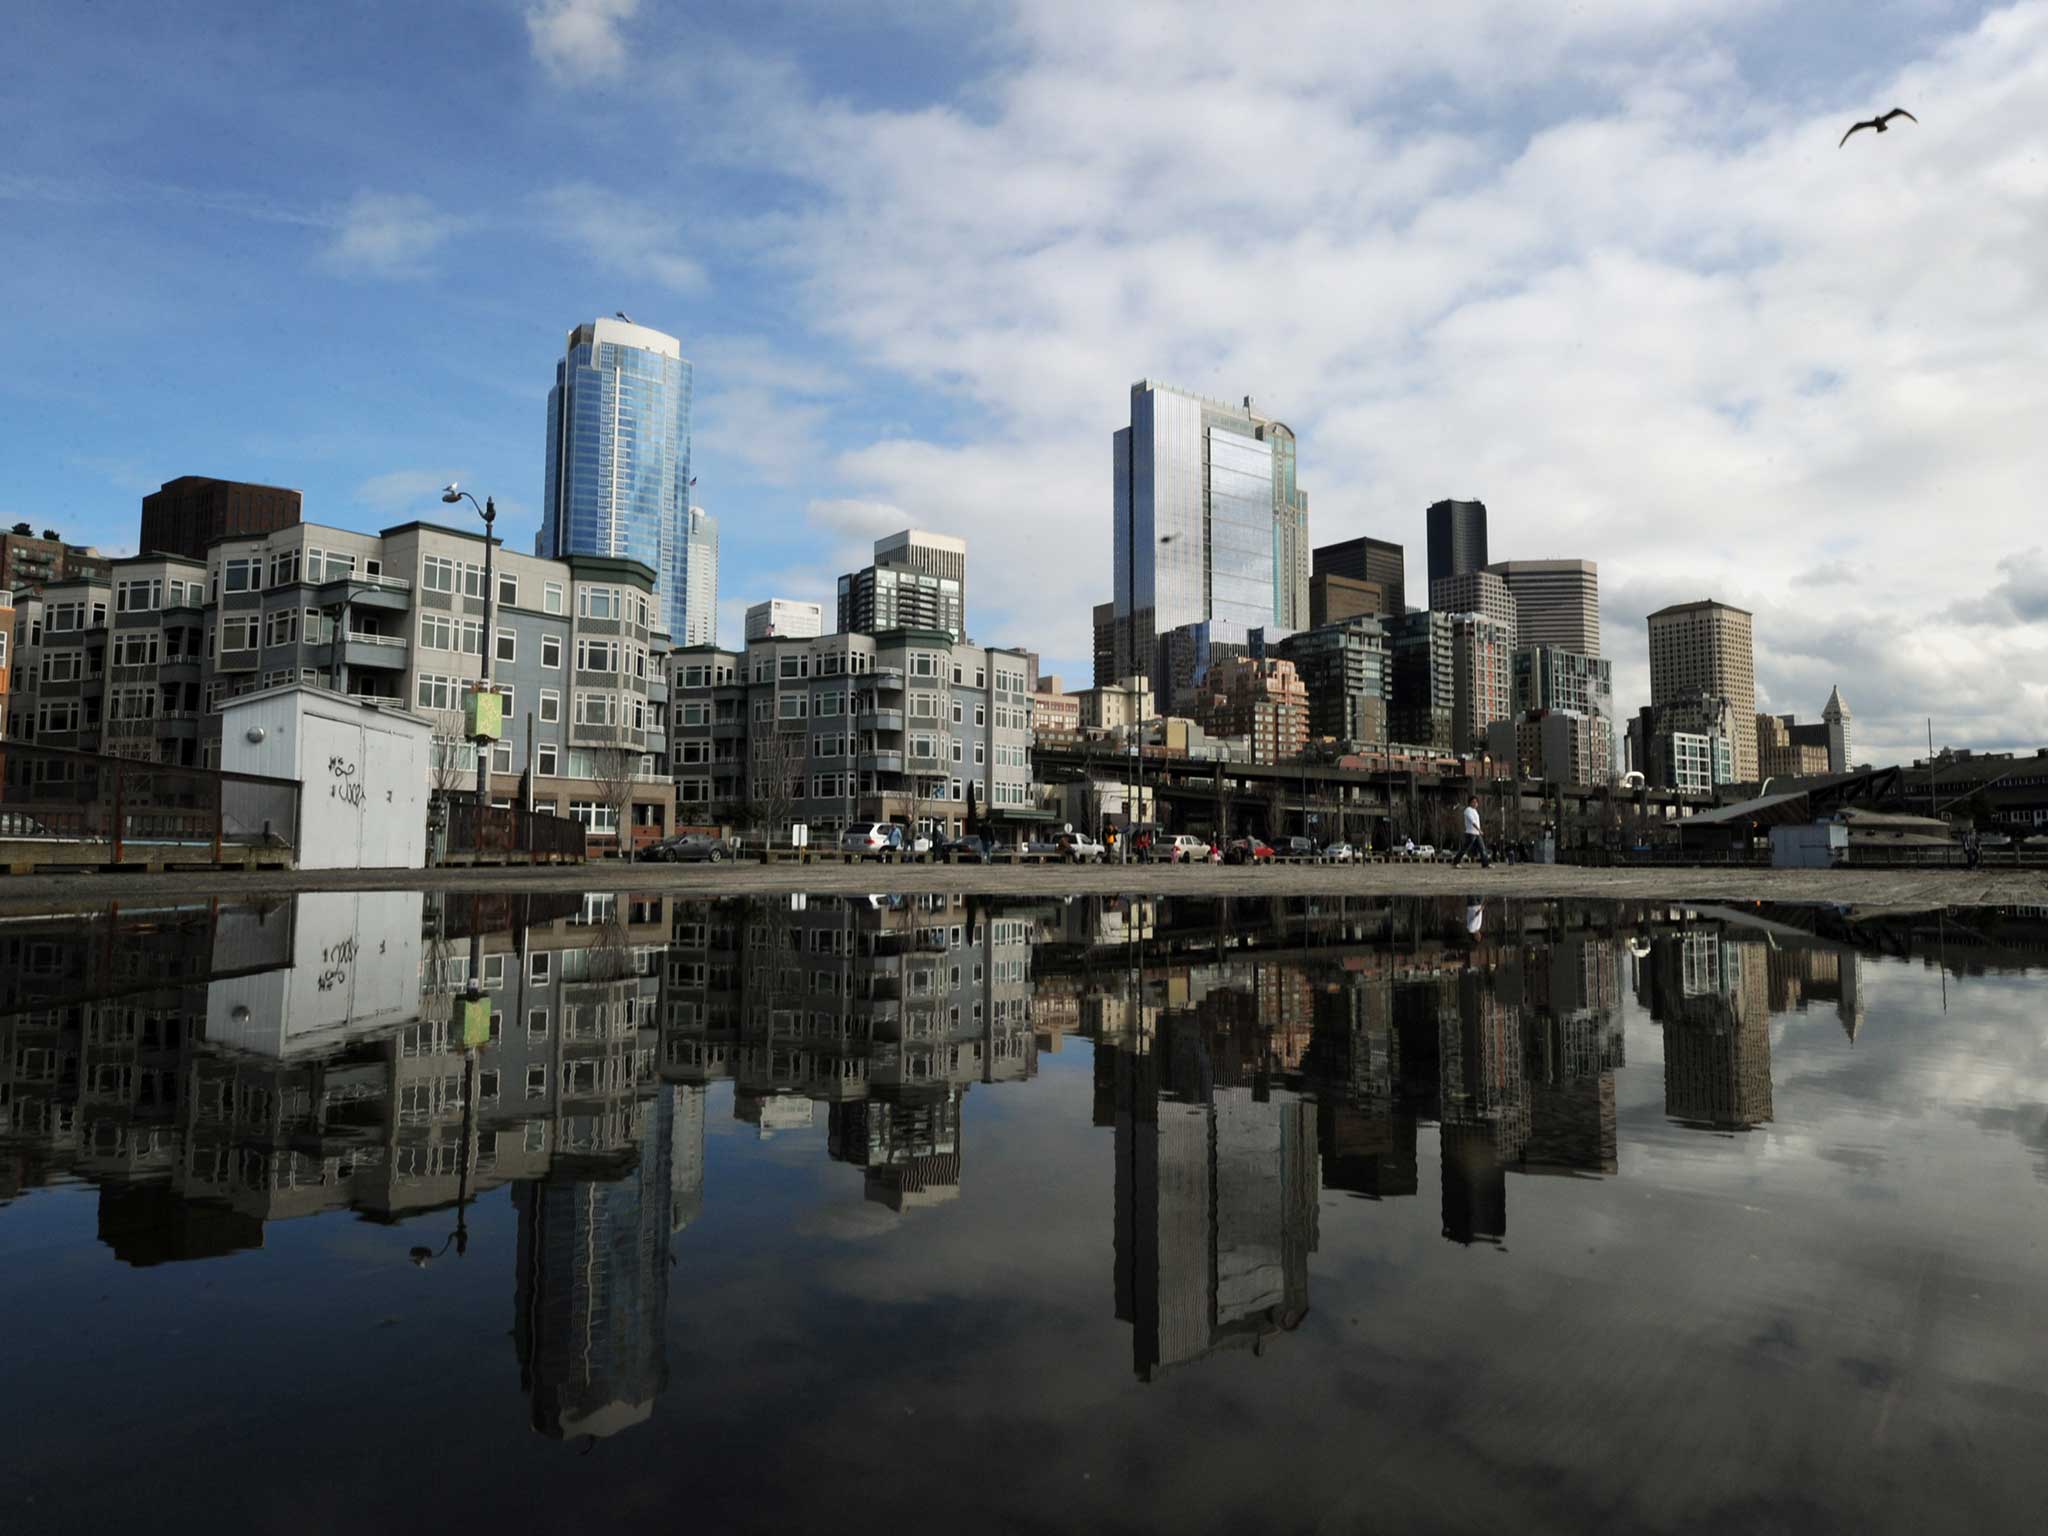 You would need an average salary of $78,500 to buy a home in Seattle.